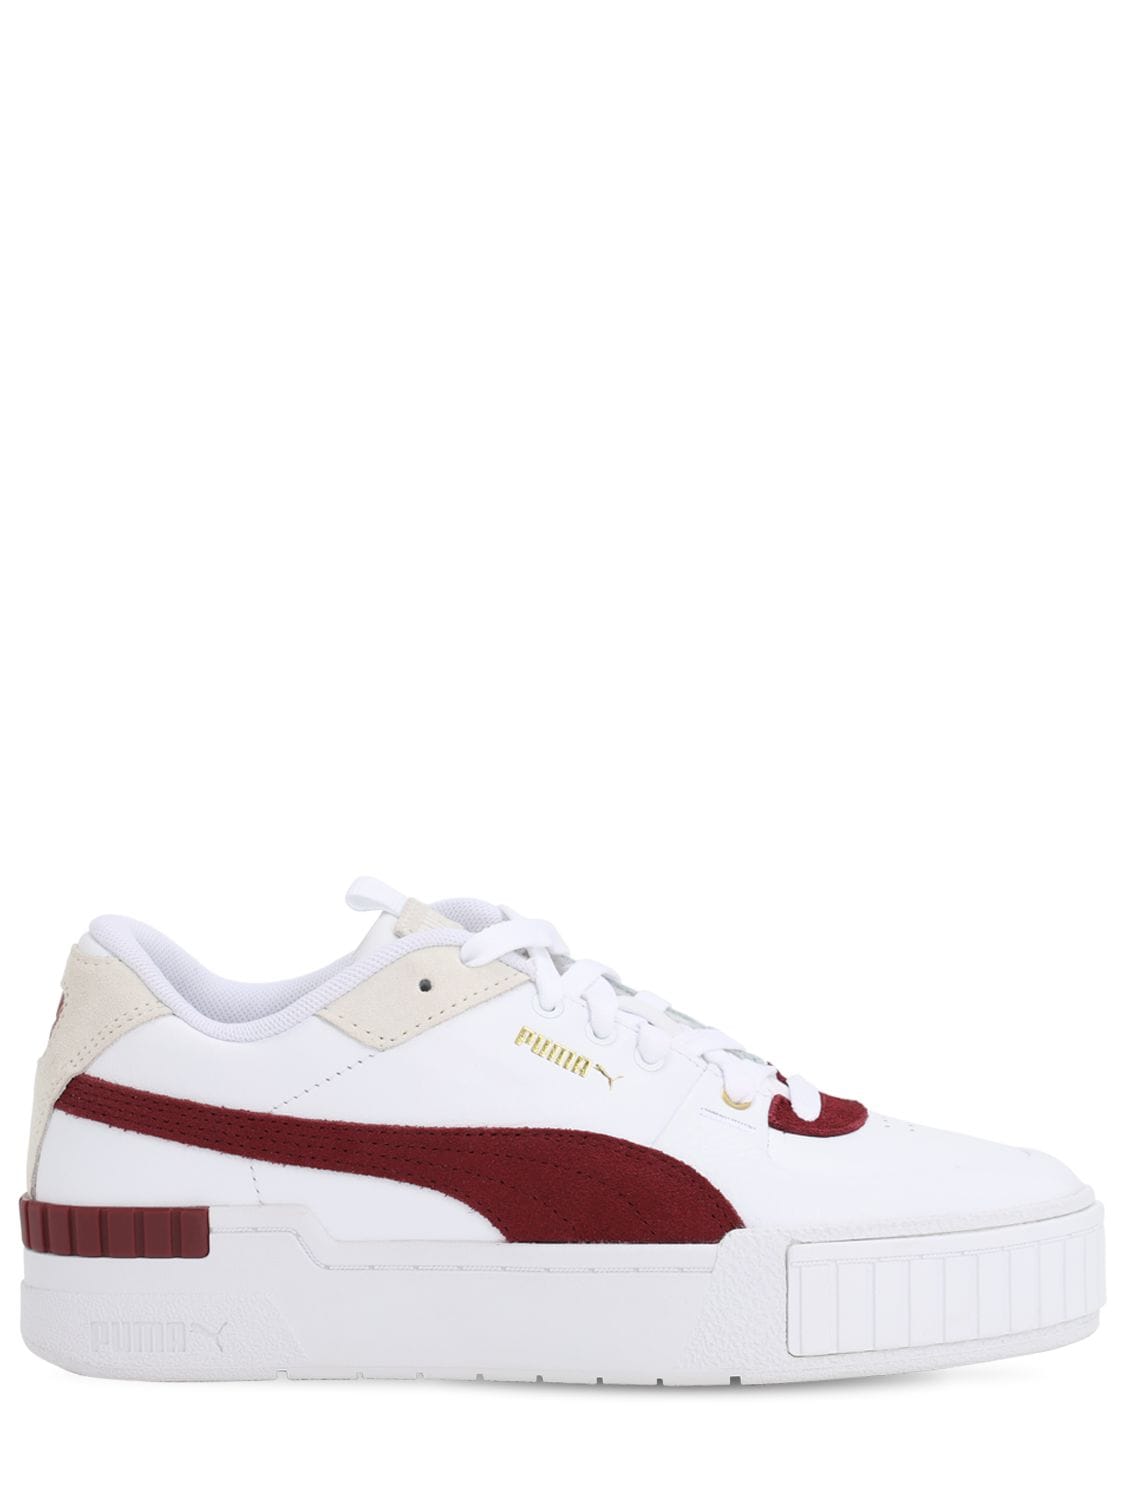 Puma Cali Sport Heritage Sneakers In White,red